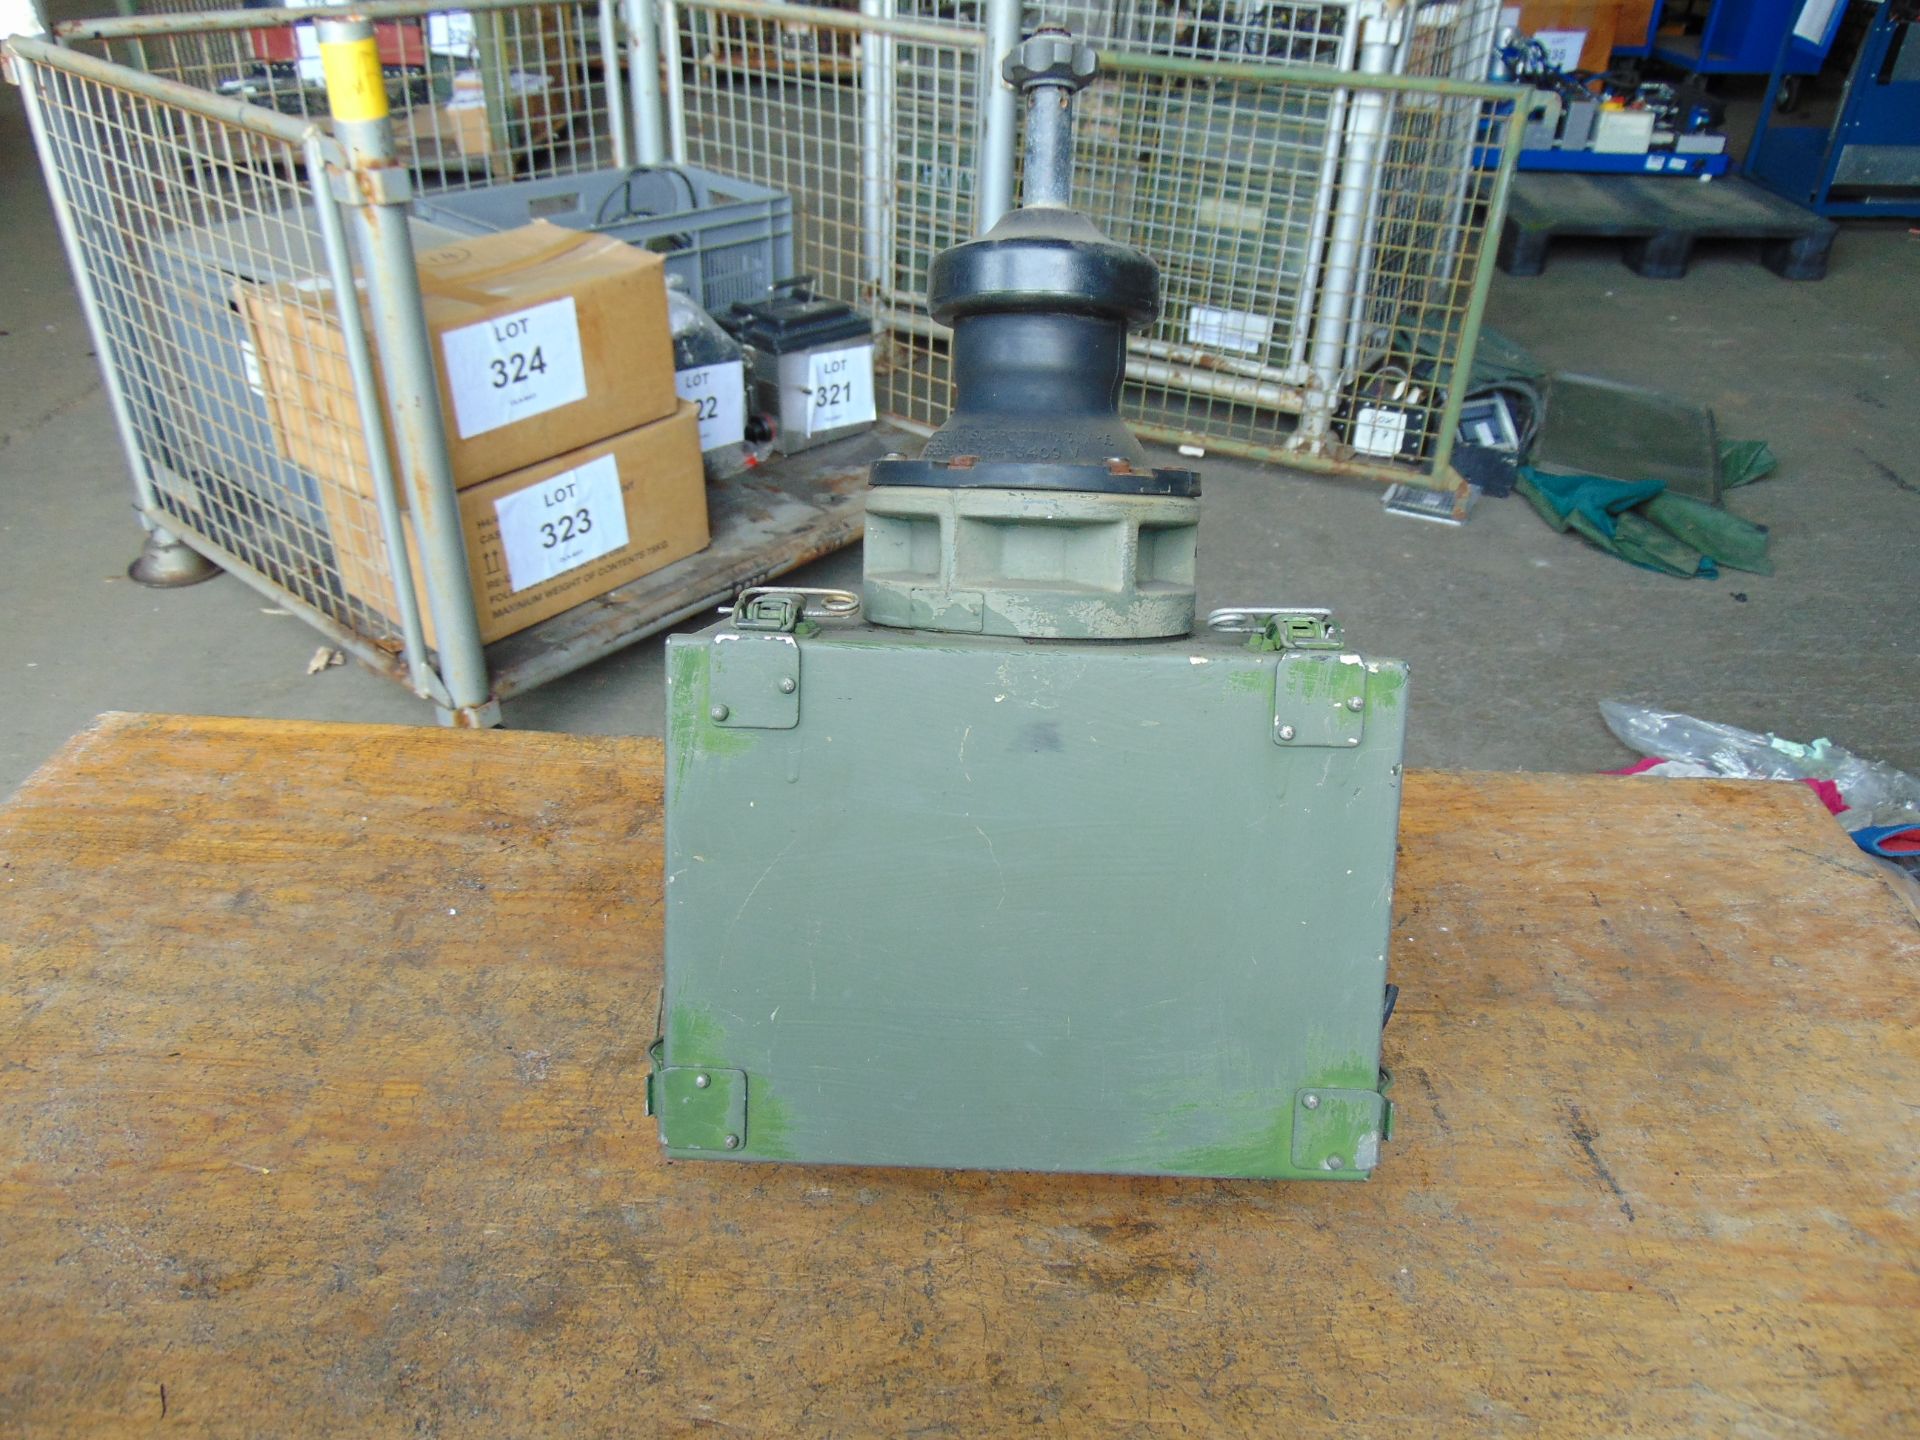 Clansman Land Rover Wing Box c/w Tuner and Antenna Base Getting Hard to Find - Image 2 of 7